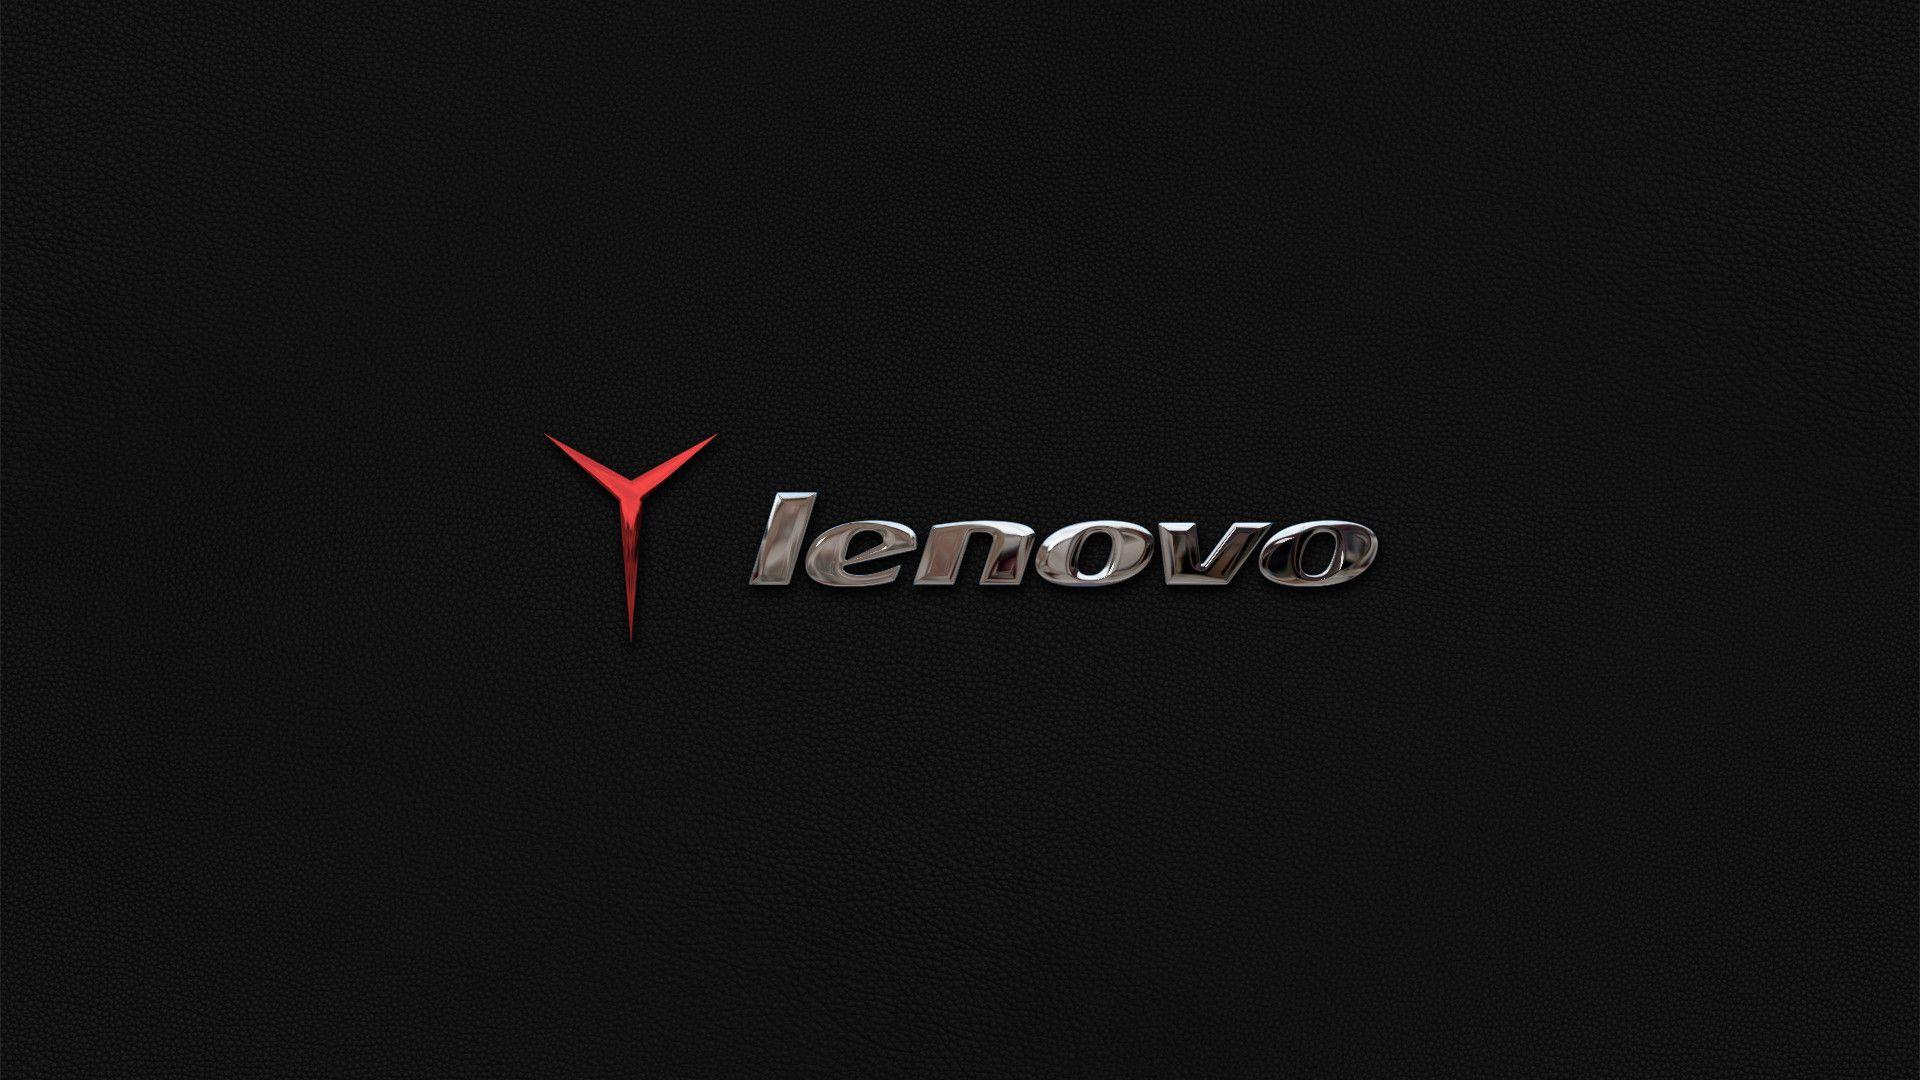 Backgrounds Pc Lenovo Hd Wallpaper Cave